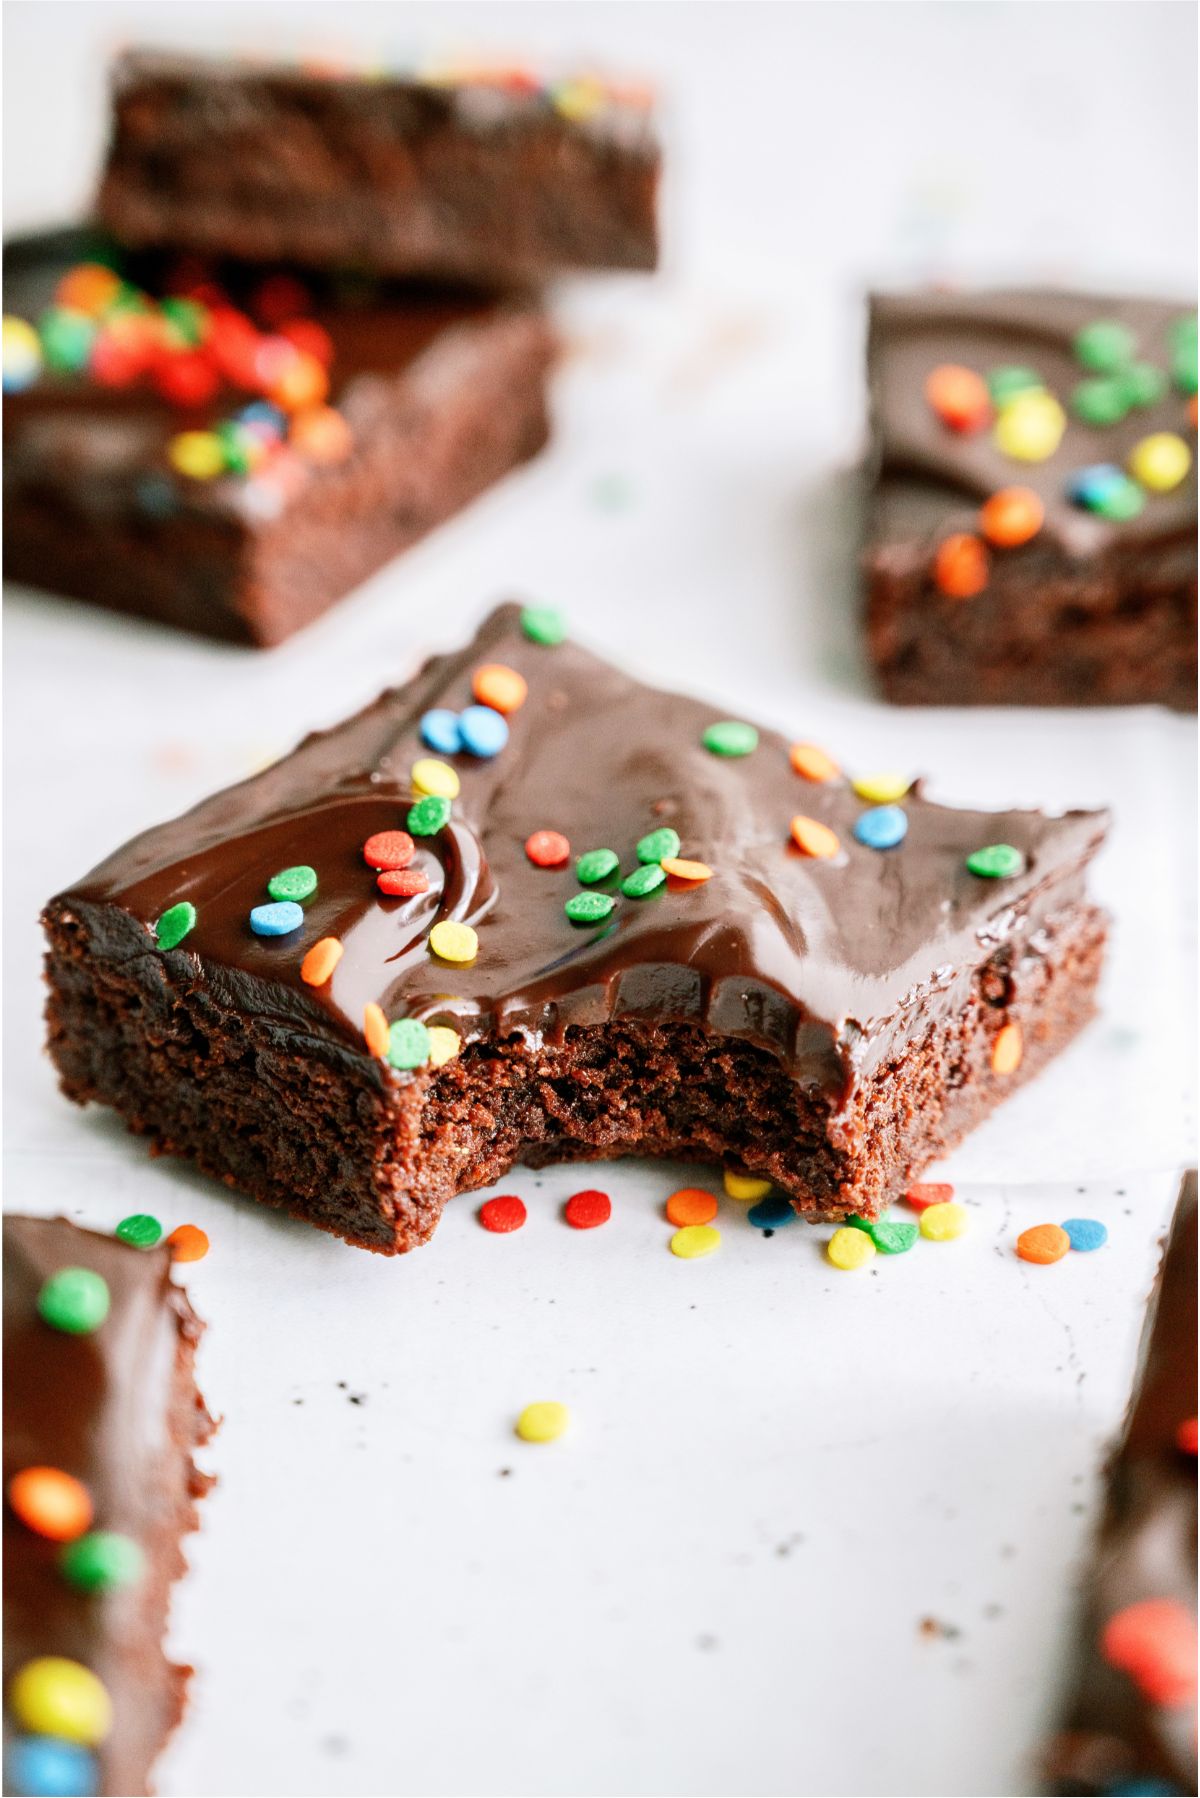 Copycat Cosmic Brownies with one missing a bite